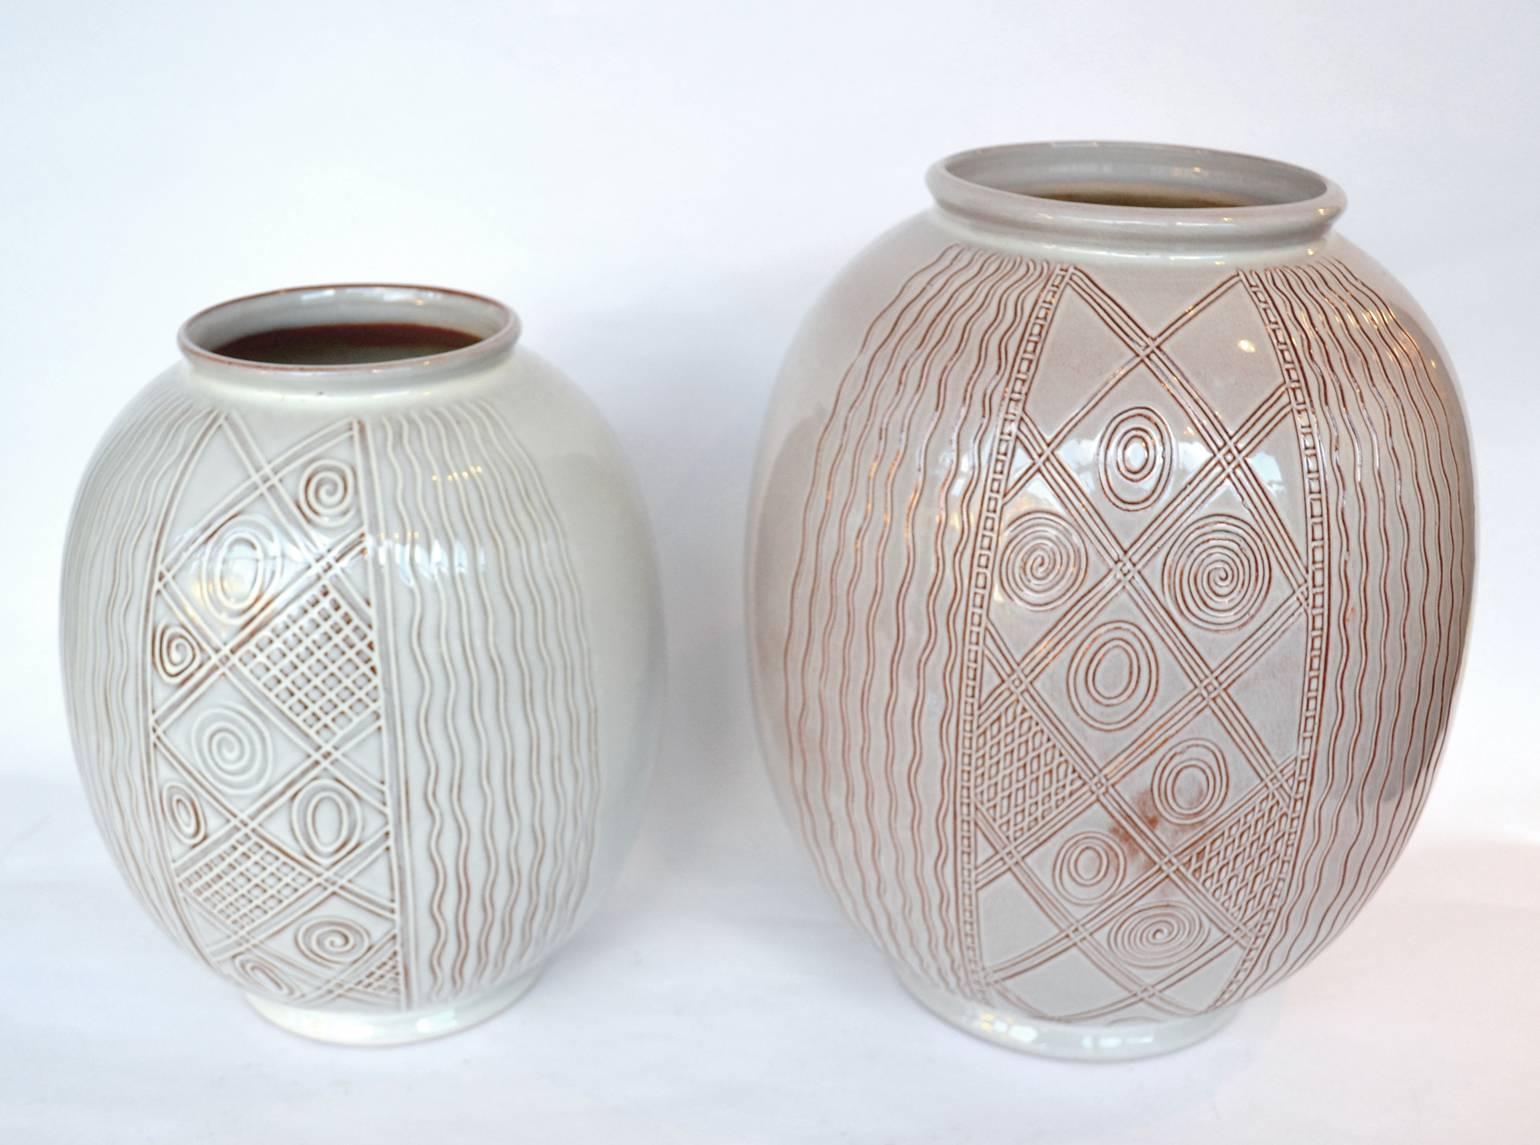 Two individually decorated vases by the Dutch company Sphinx in Maastricht, 1950s.
The undertone is orange and the top glaze is white. After turning them they have been hand decorated by an engraved pattern inspired by Art Deco ornaments. This